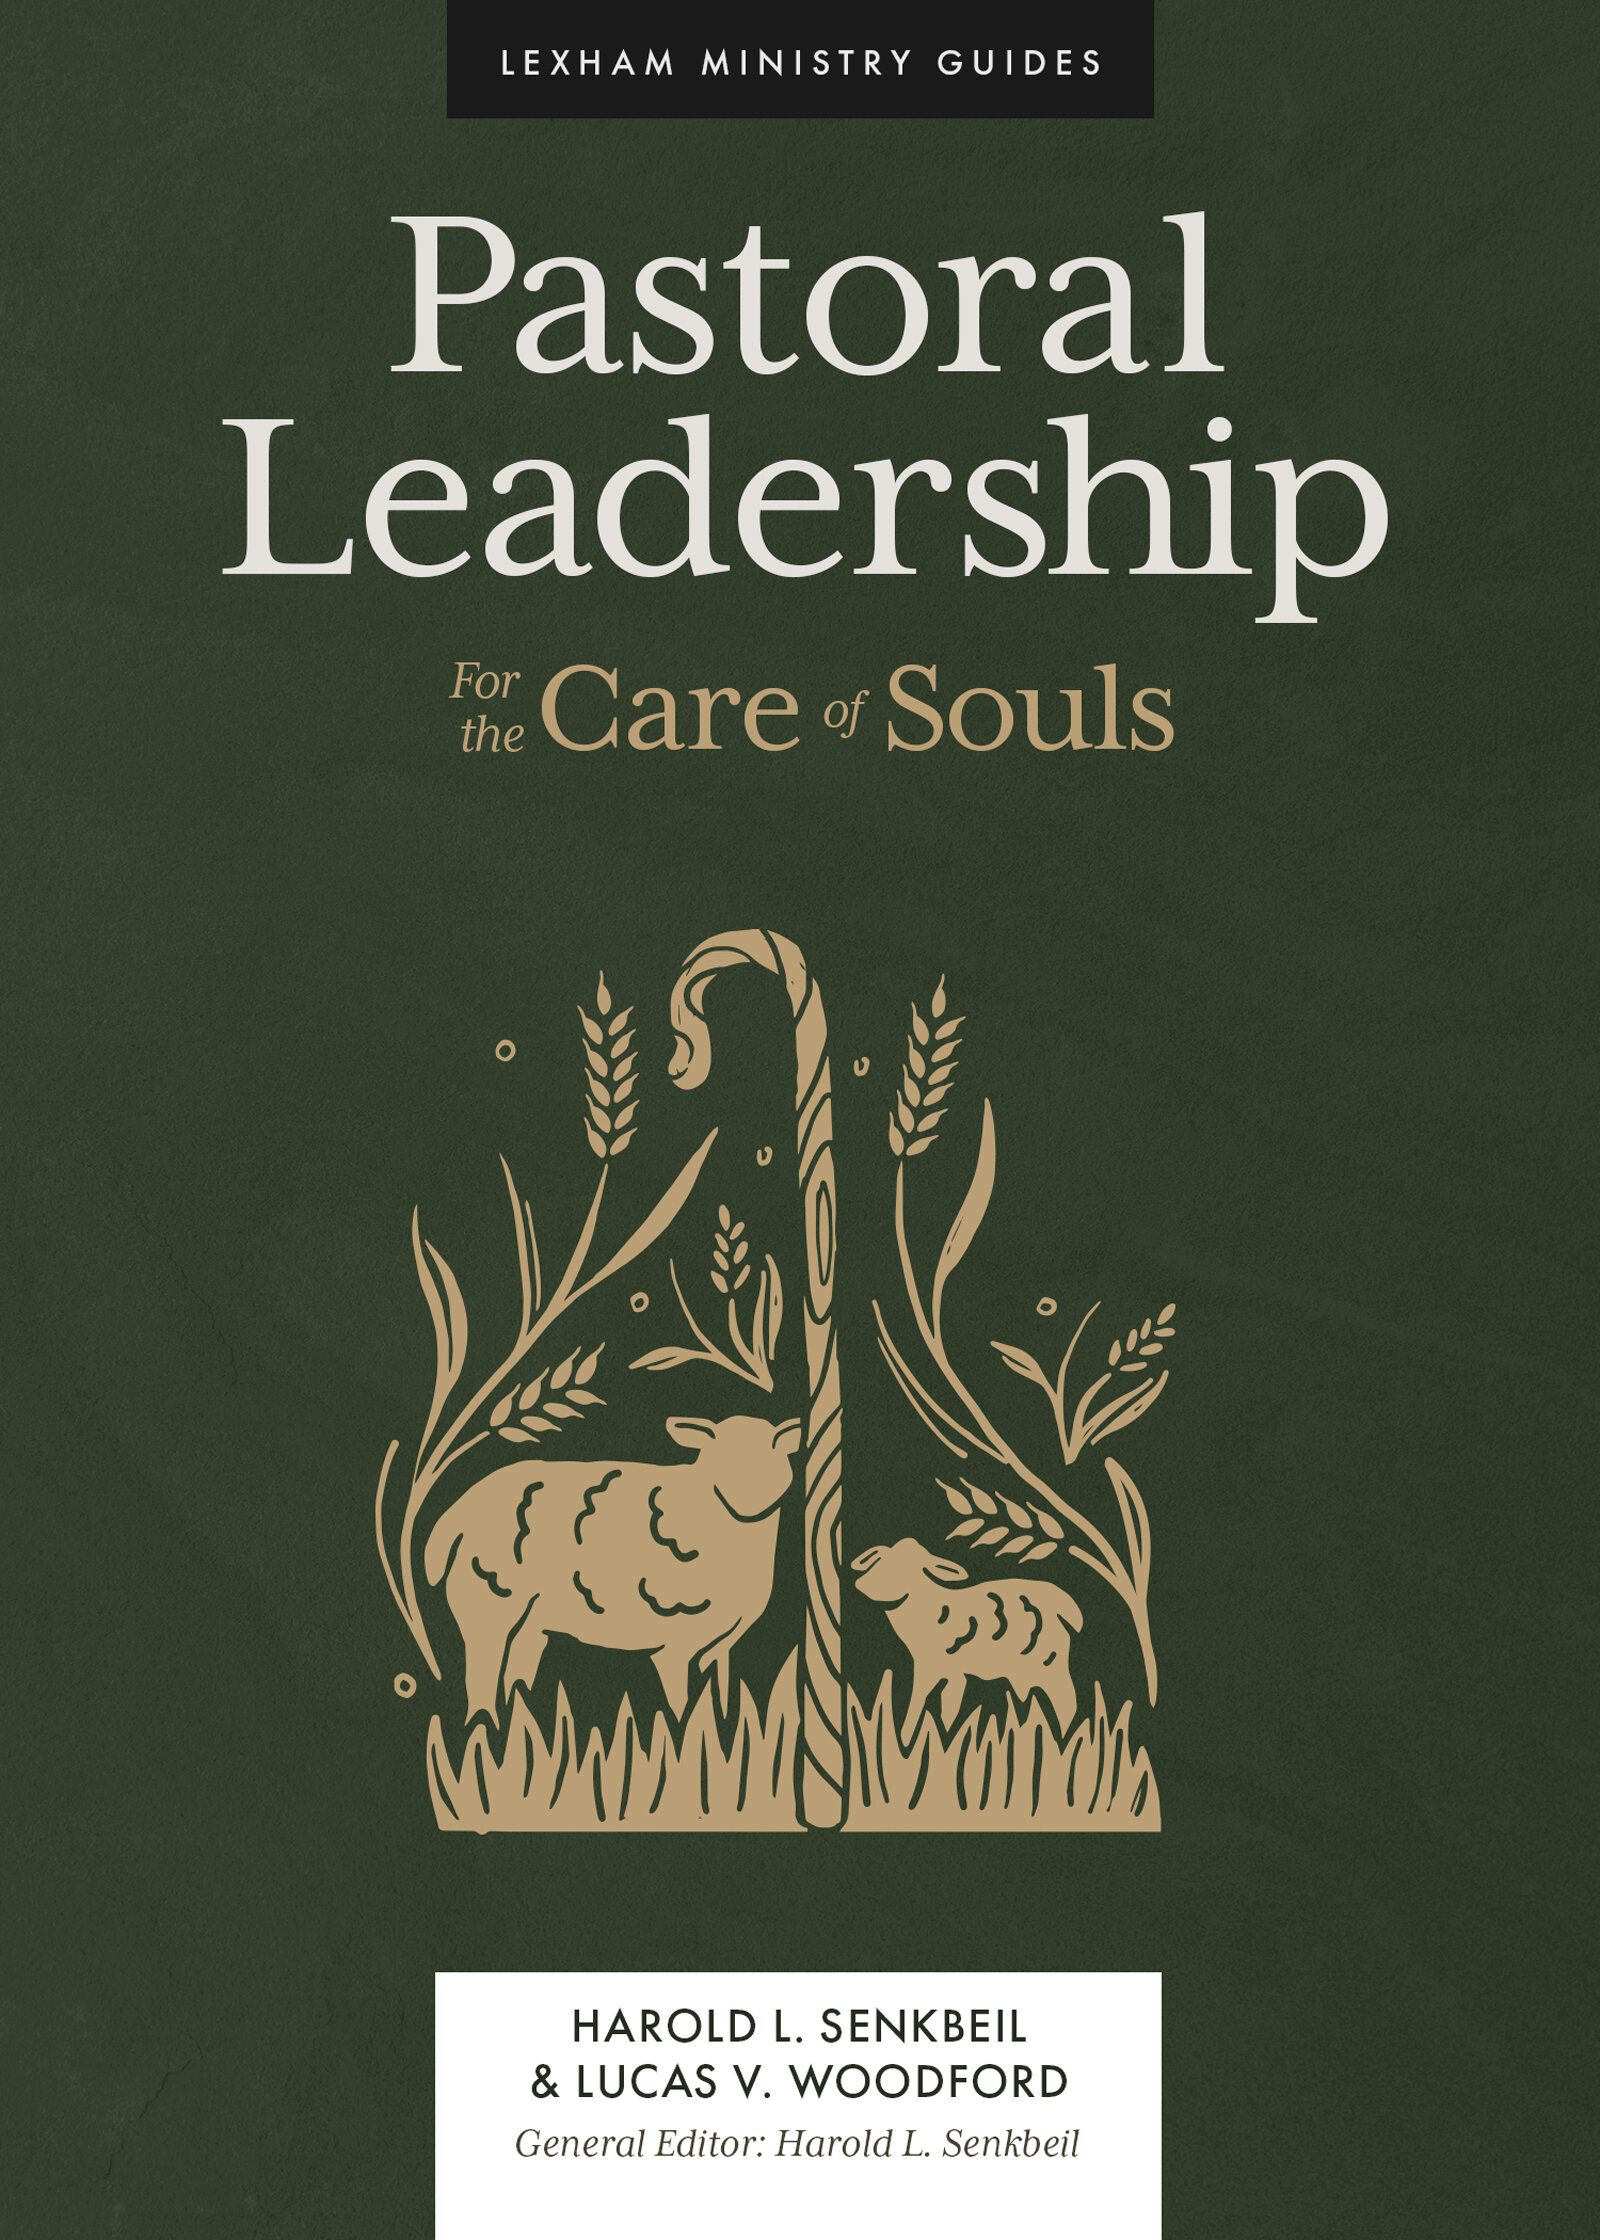 Pastoral Leadership: For the Care of Souls